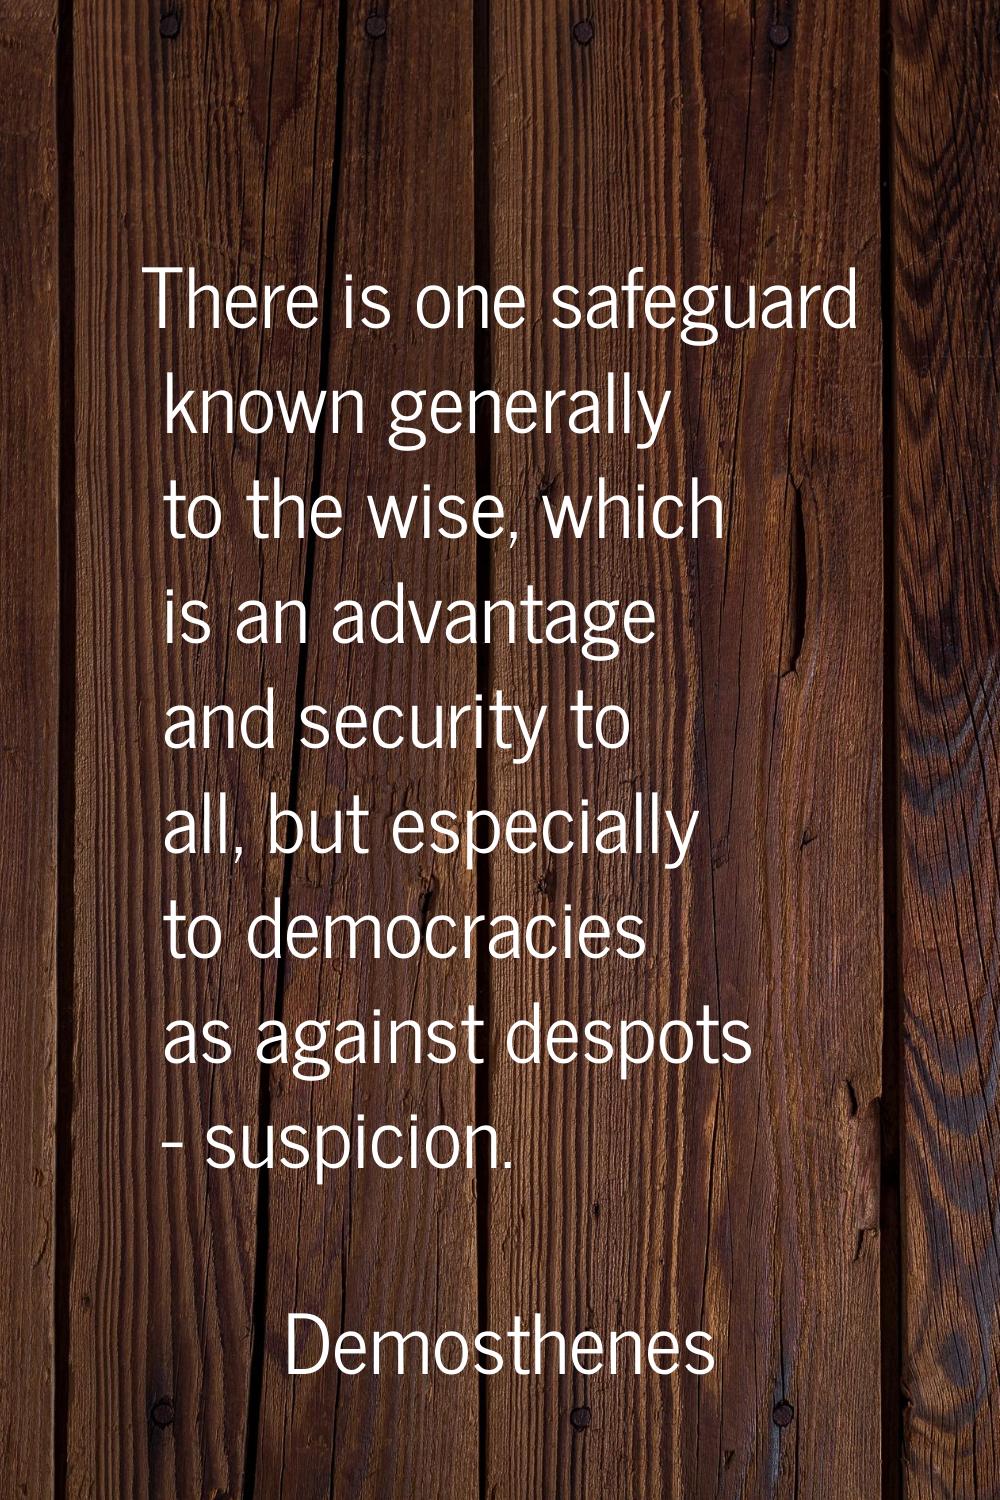 There is one safeguard known generally to the wise, which is an advantage and security to all, but 